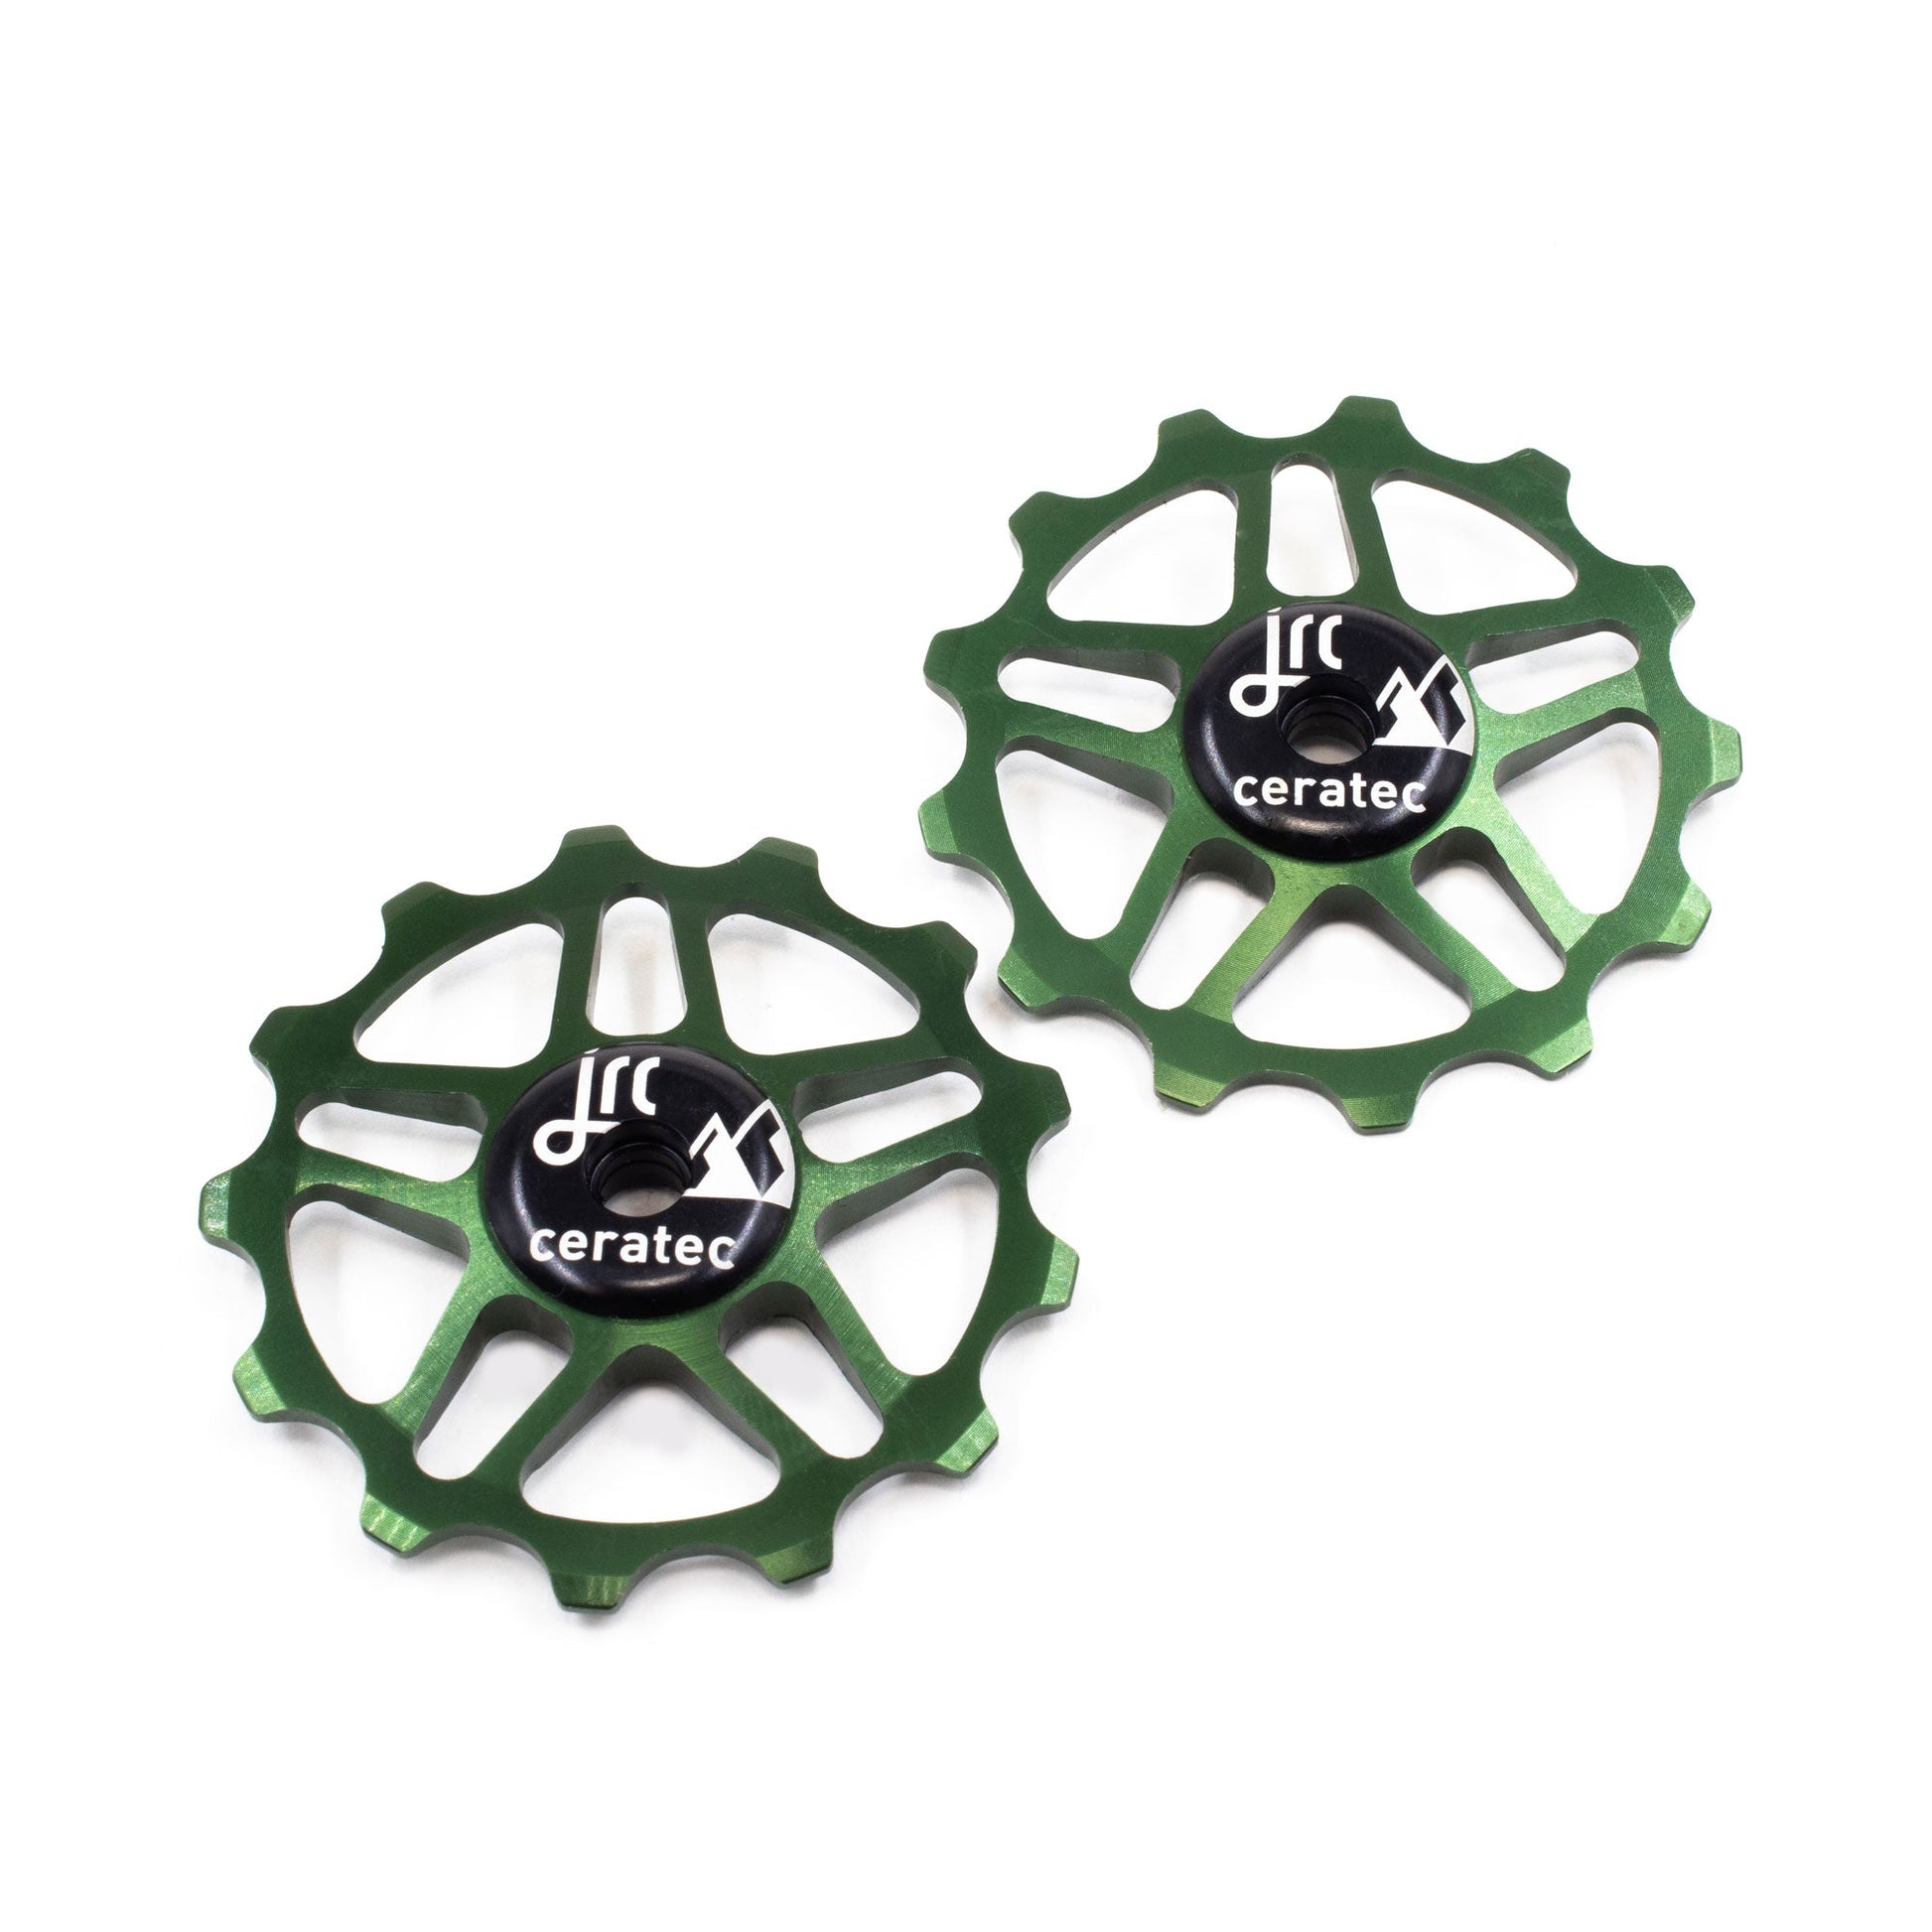 Emerald green, lightweight aluminium pulley wheel set for bicycle, compatible with 13 tooth Shimano 12 speed